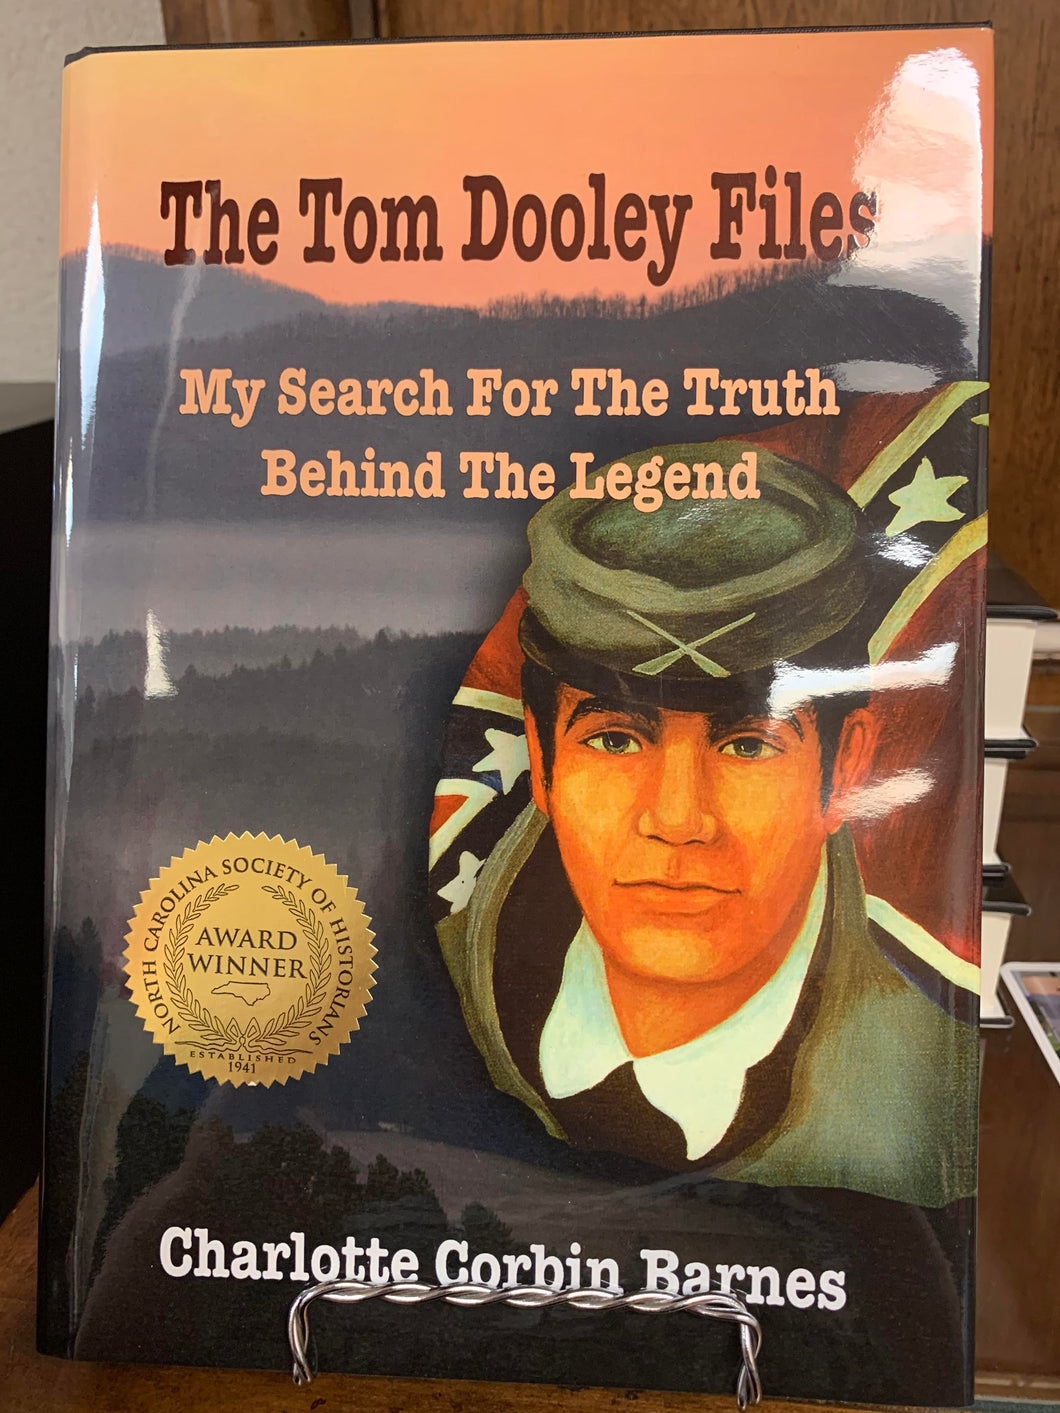 The Tom Dooley Files: My Search for the Truth Behind the Legend by